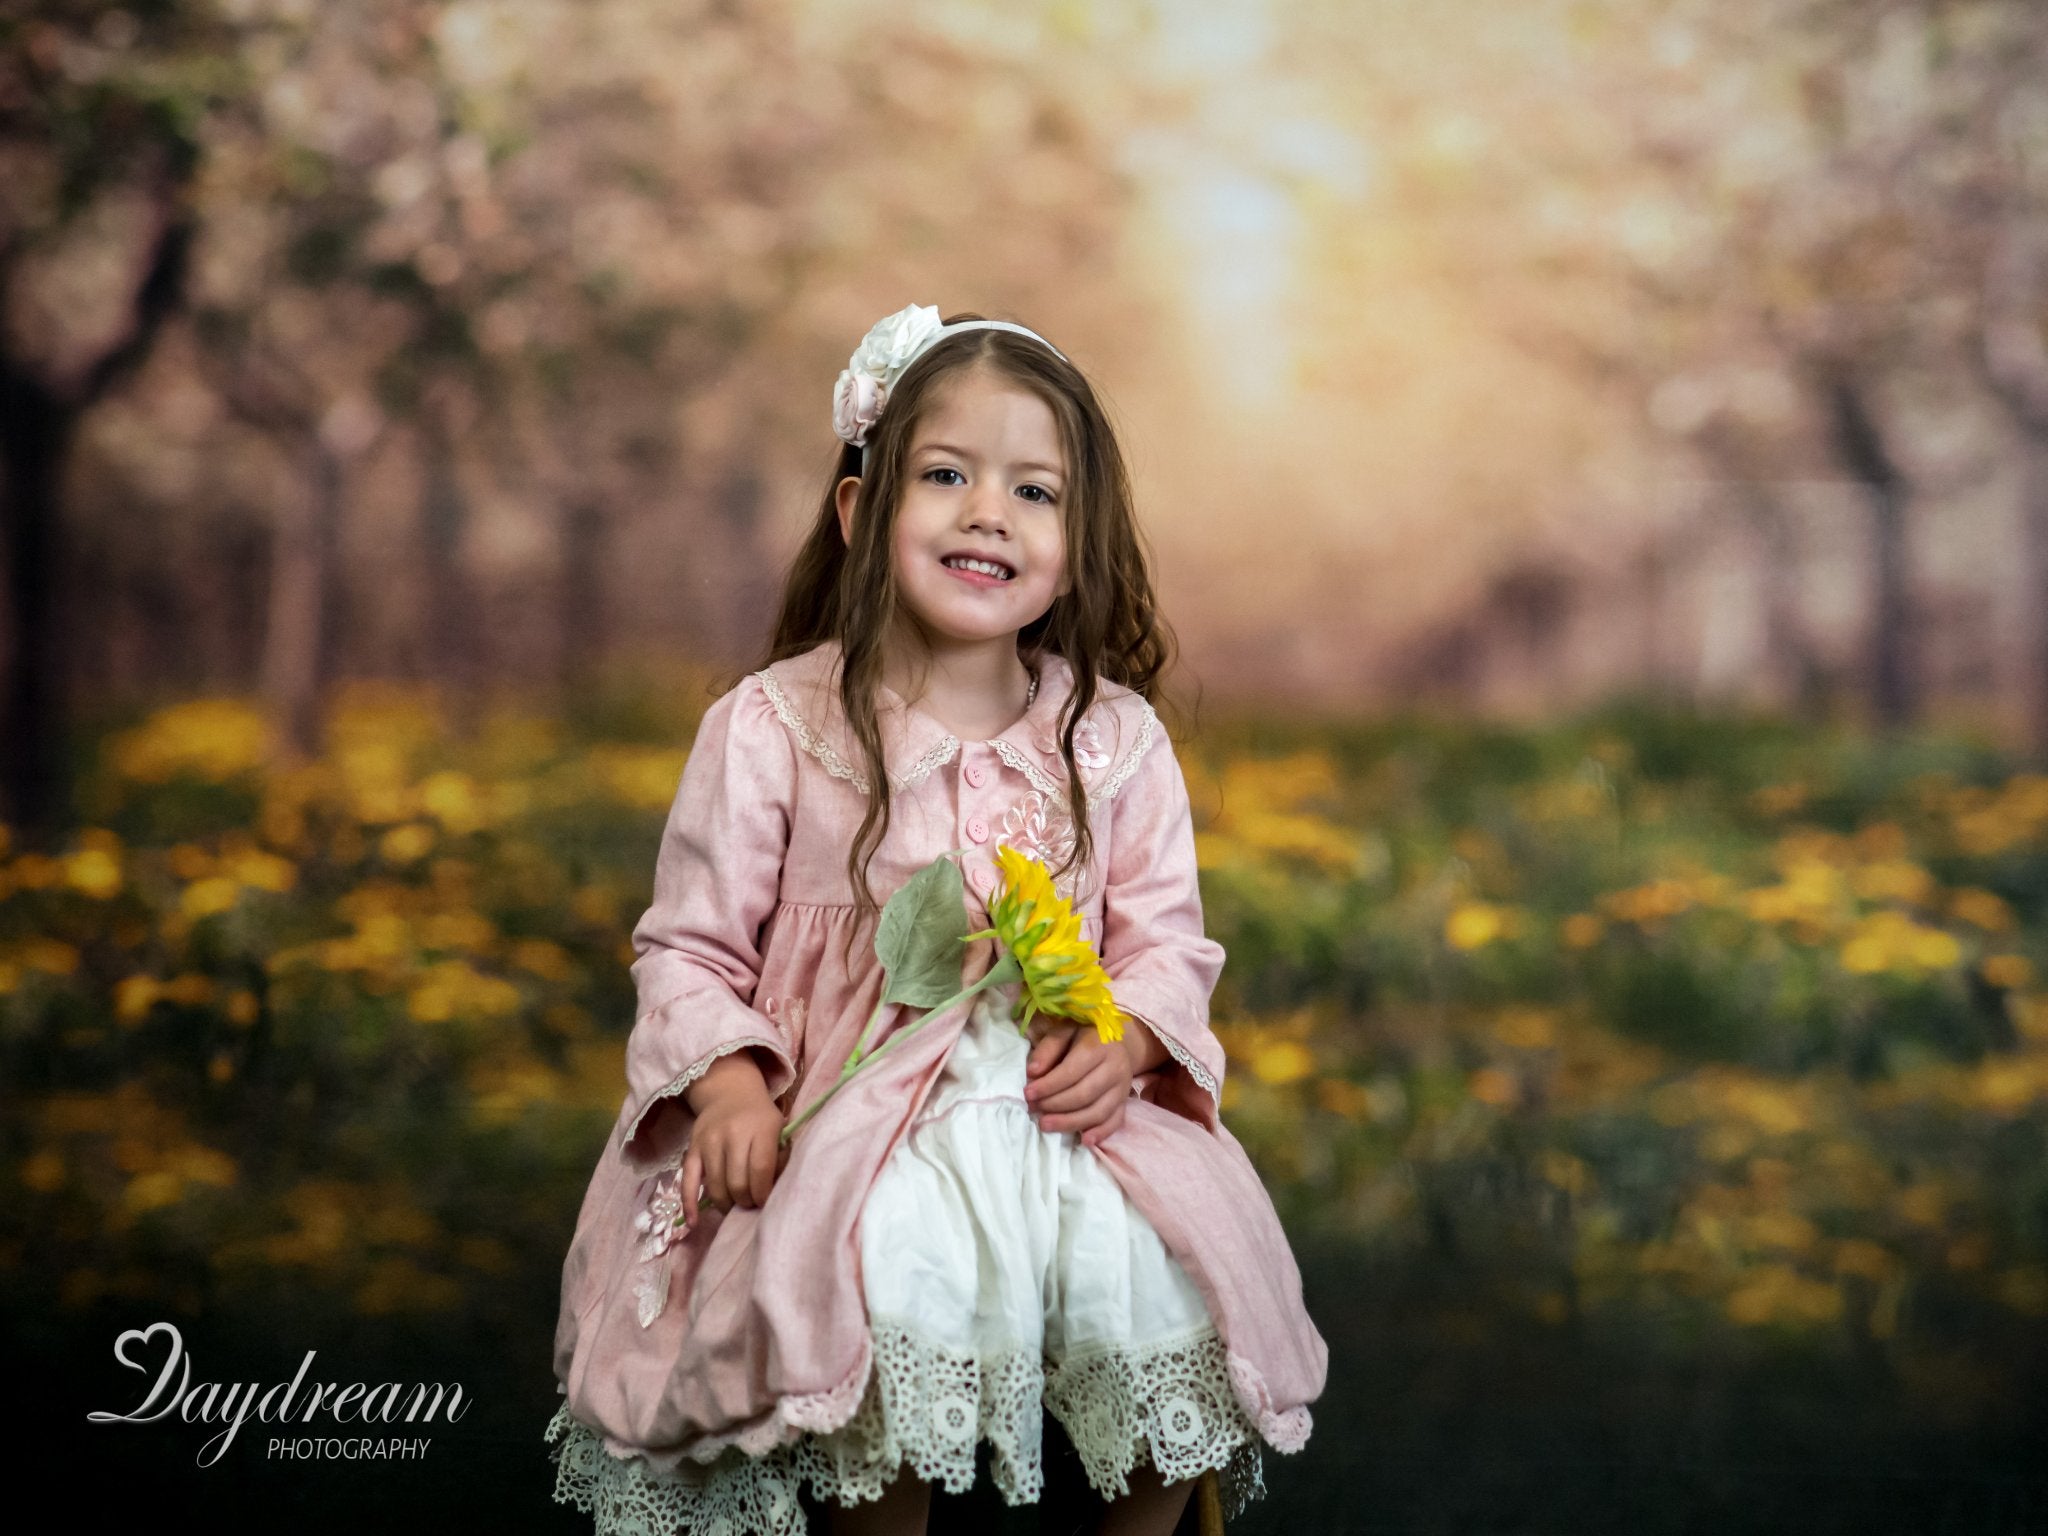 Kate Springtime Orchard in Yellow Backdrop for Photography Designed by Lisa Granden